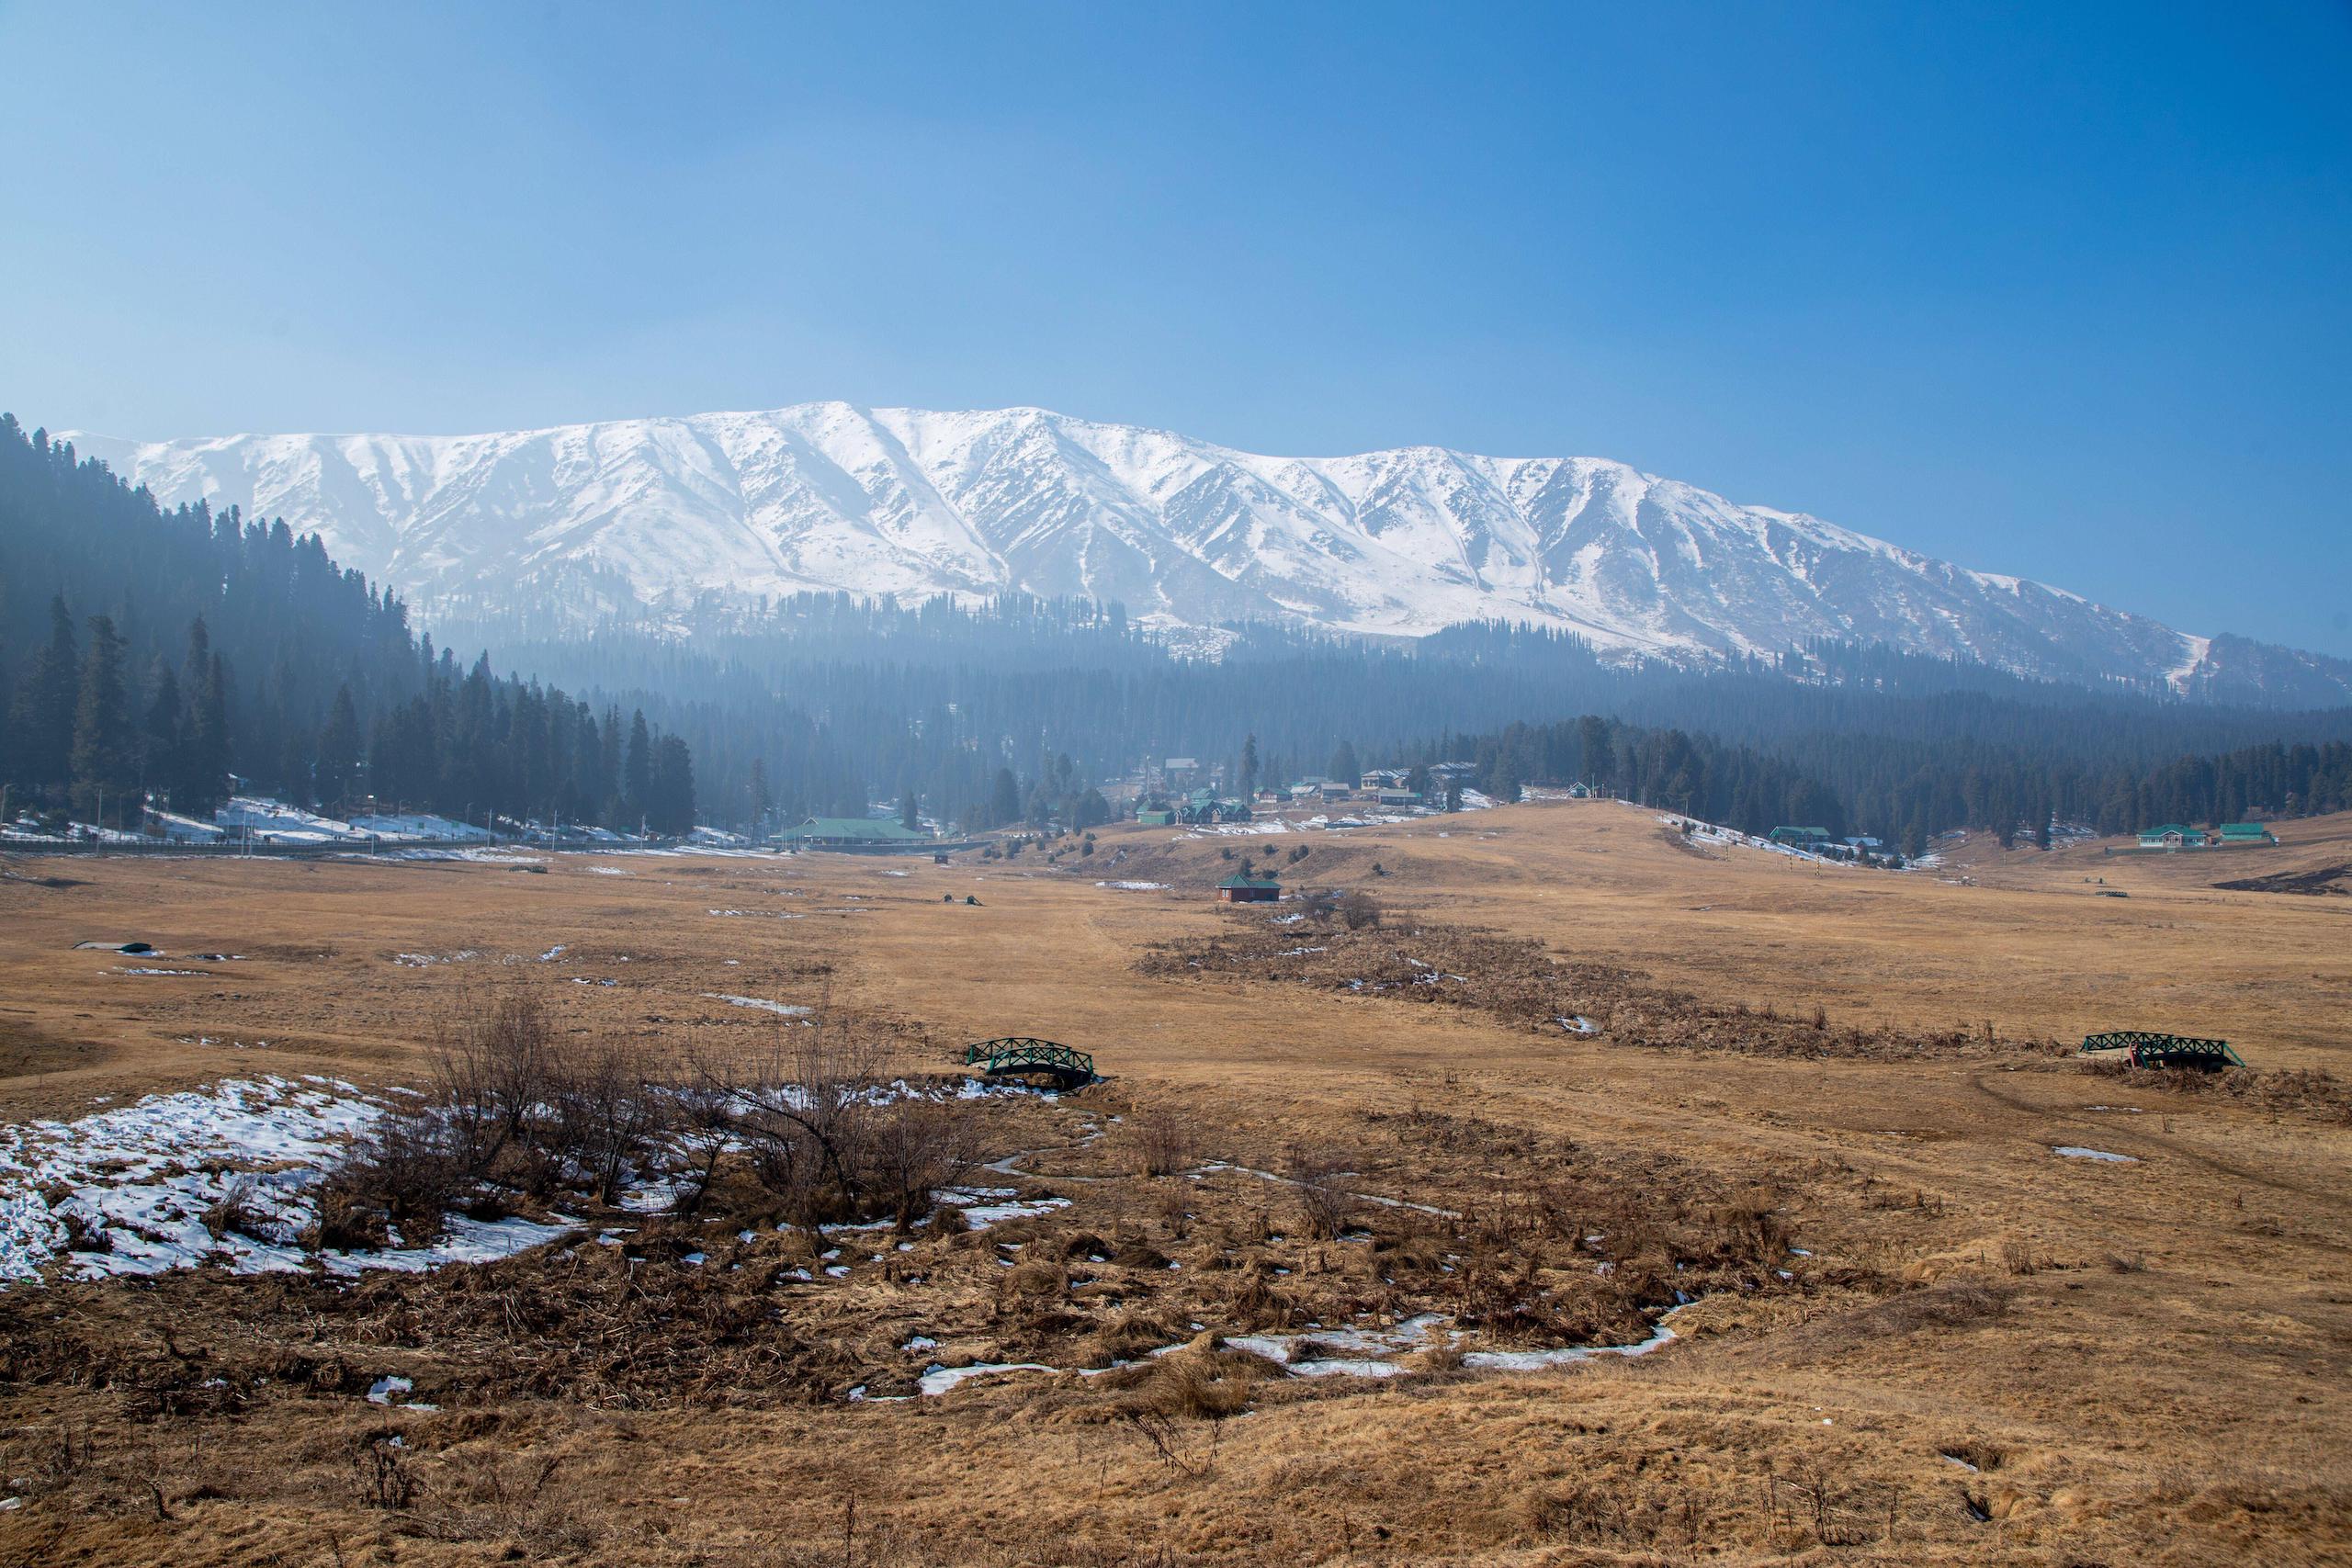 <p>Renowned for its ski resorts, Gulmarg in Jammu &amp; Kashmir is in the middle of an extreme dry spell that has left its slopes and landscapes devoid of snow (Image: Faisal Bashir / Alamy)</p>